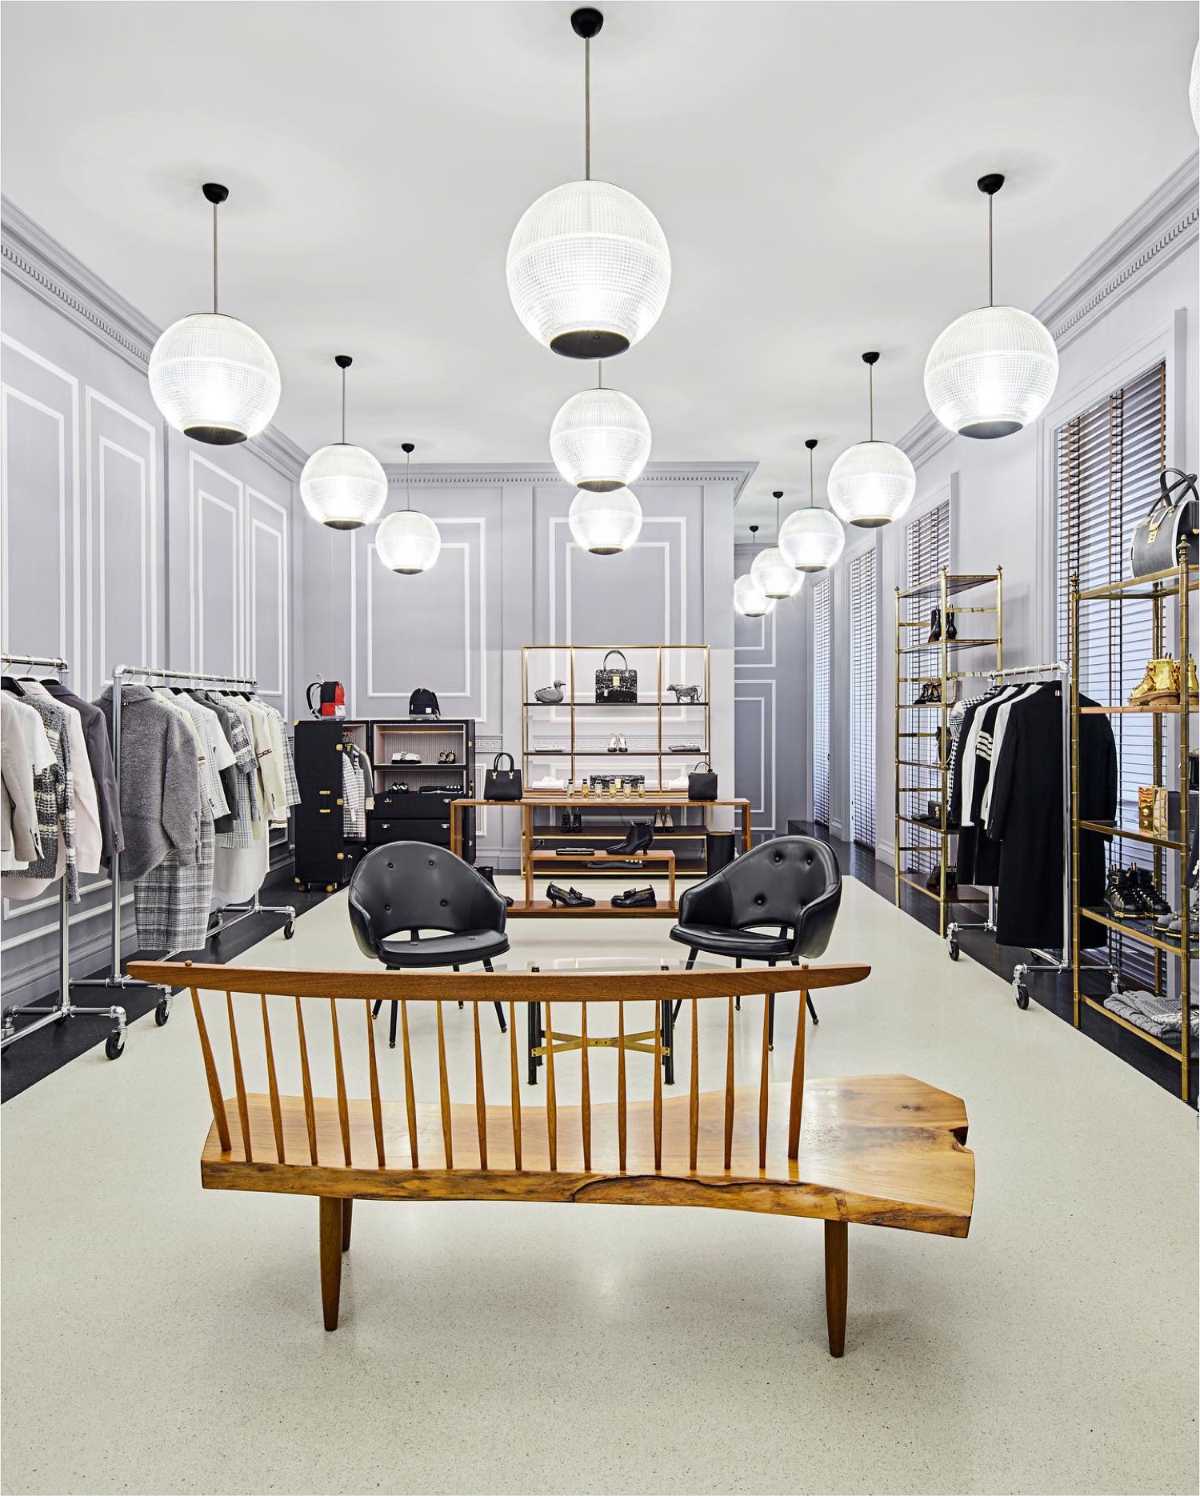 New Openings Of Luxury Boutiques - February 2022